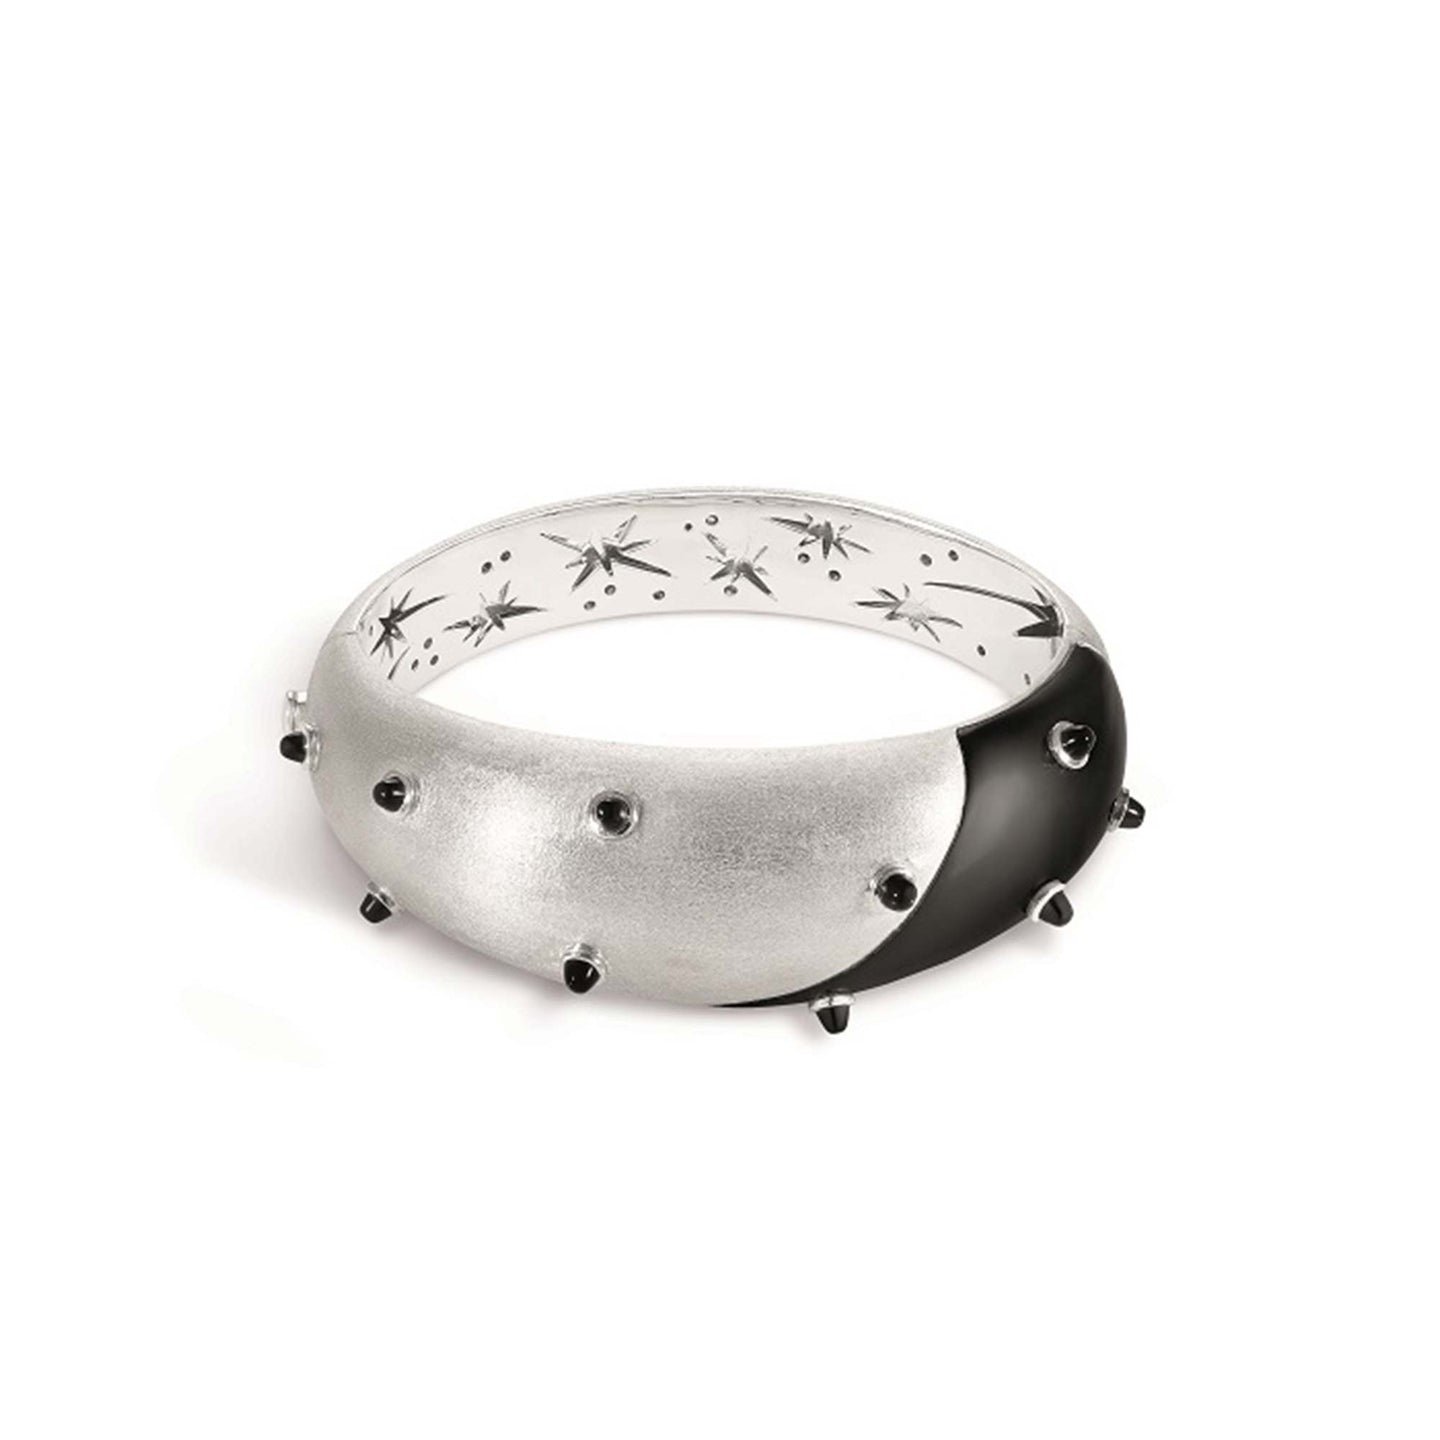 Cosmic Sputnik Eclipse Bangle in 18ct White Gold with Onyx